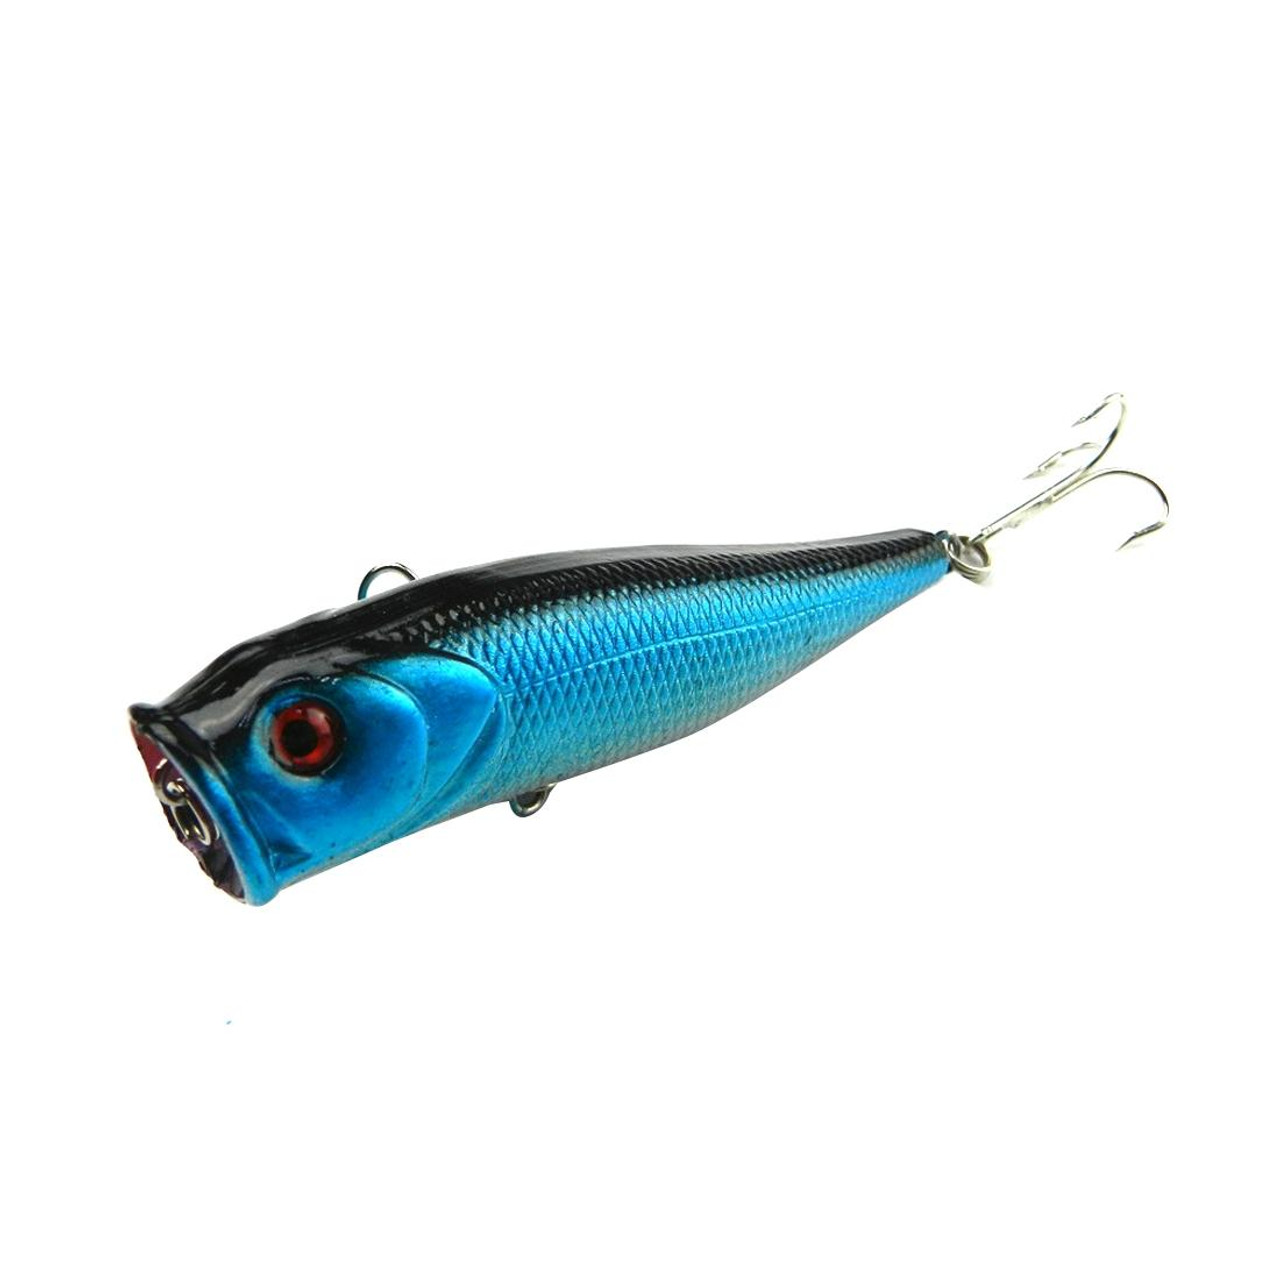 HENGJIA Plastic Artificial Fishing Lures Popper Bionic Fishing Bait with  Hooks, Length: 9 cm, Random Color Delivery, snatcher